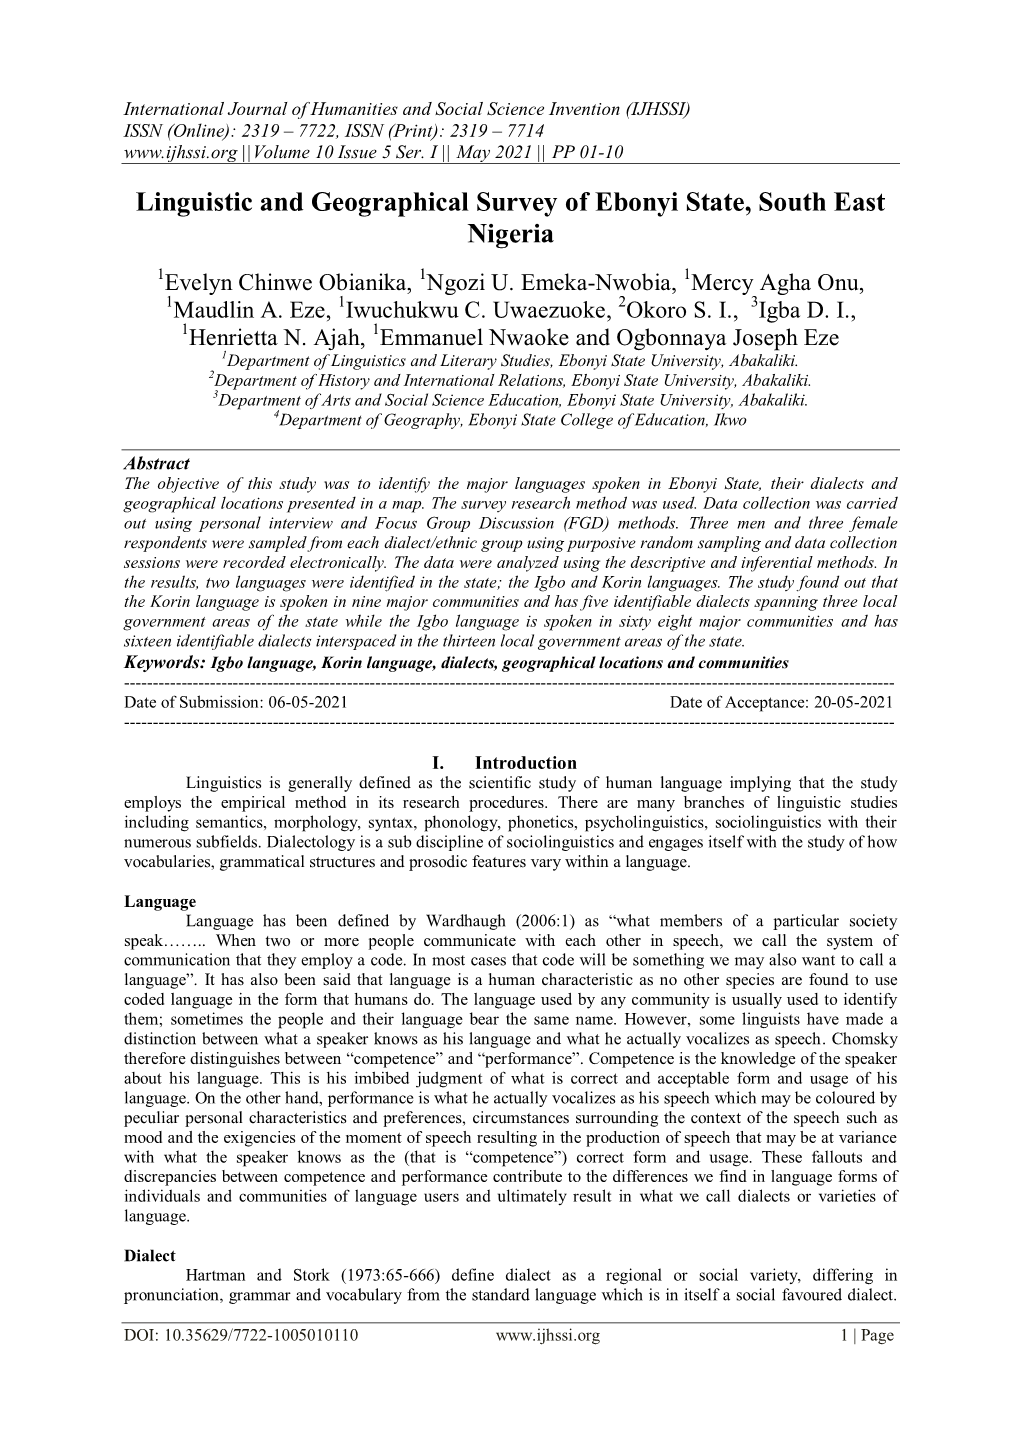 Linguistic and Geographical Survey of Ebonyi State, South East Nigeria